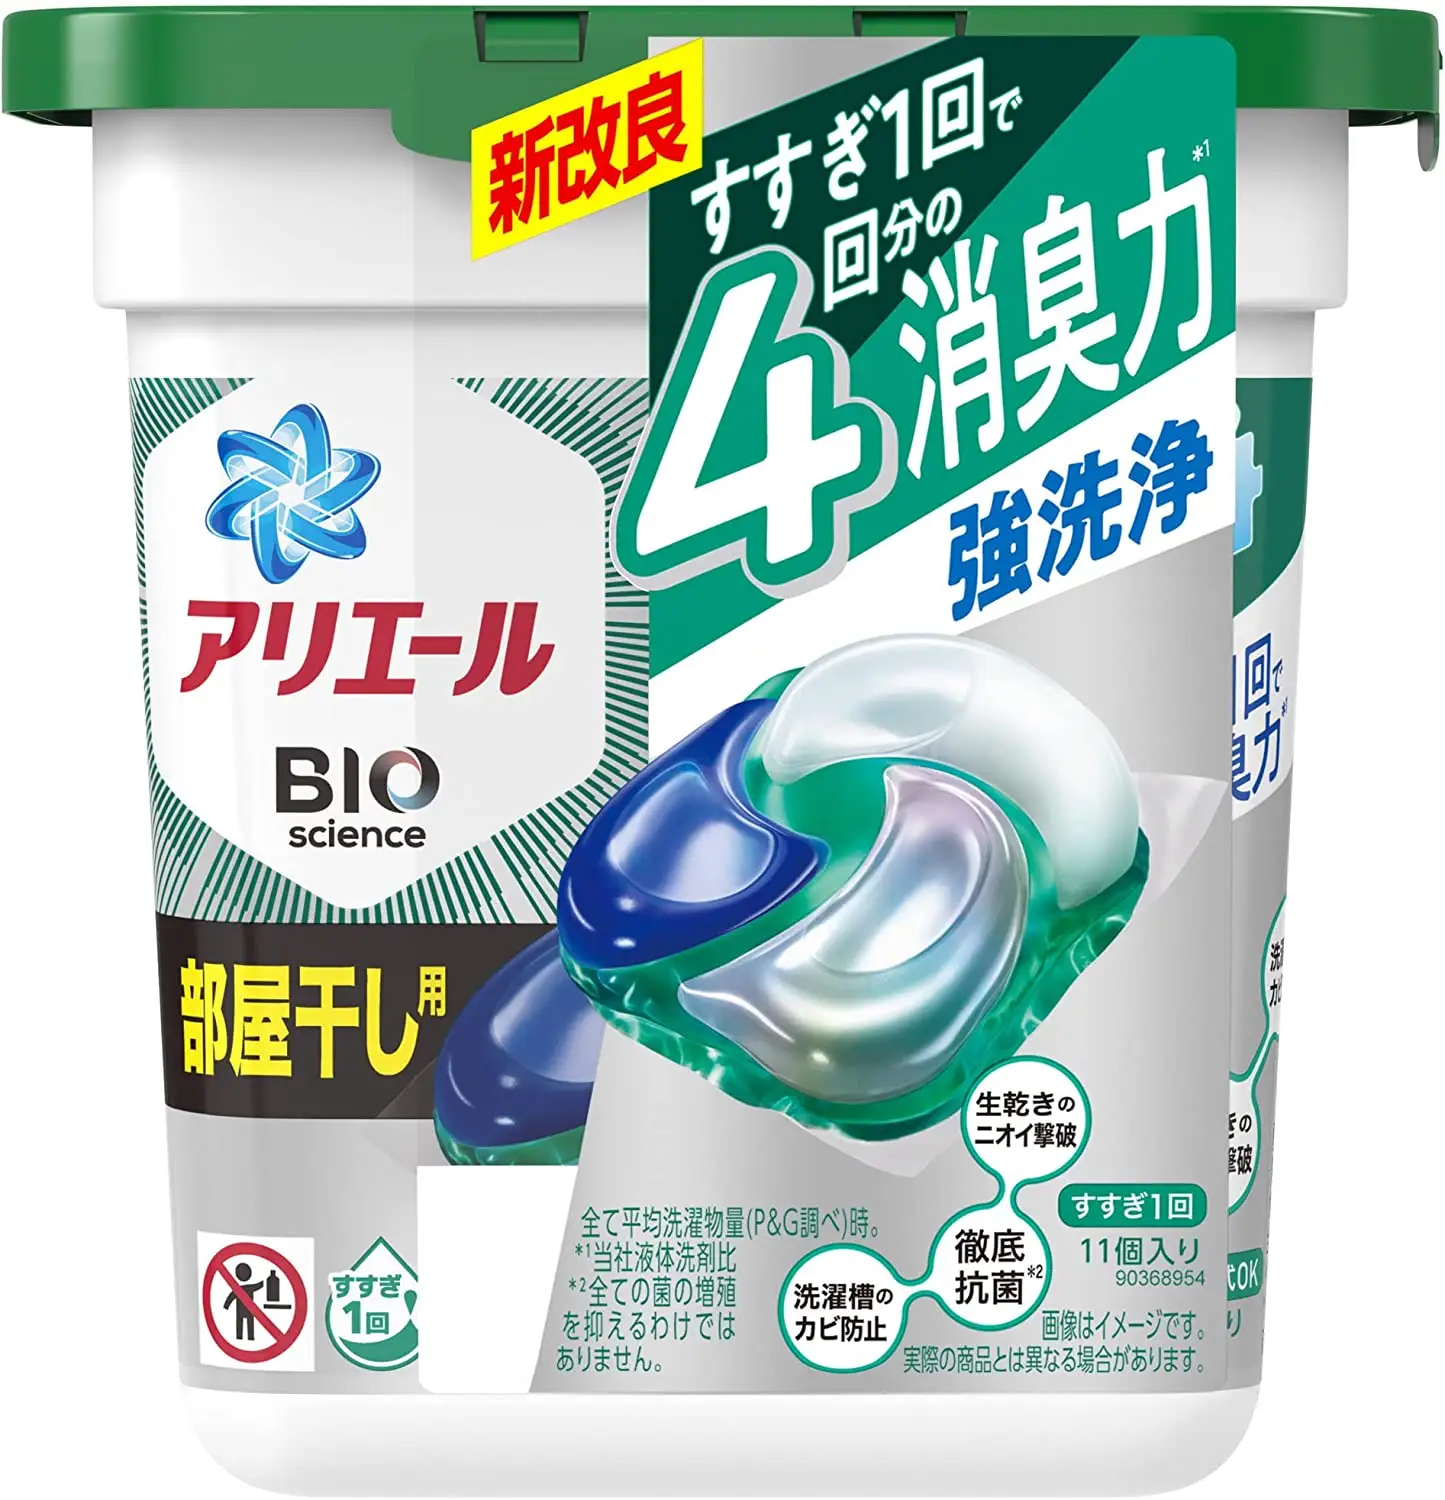 High quality deodorization P & G Clothes cleaning Drying Laundry Detergent Pods 12 Pieces Latest 4 in 1 cleaning products